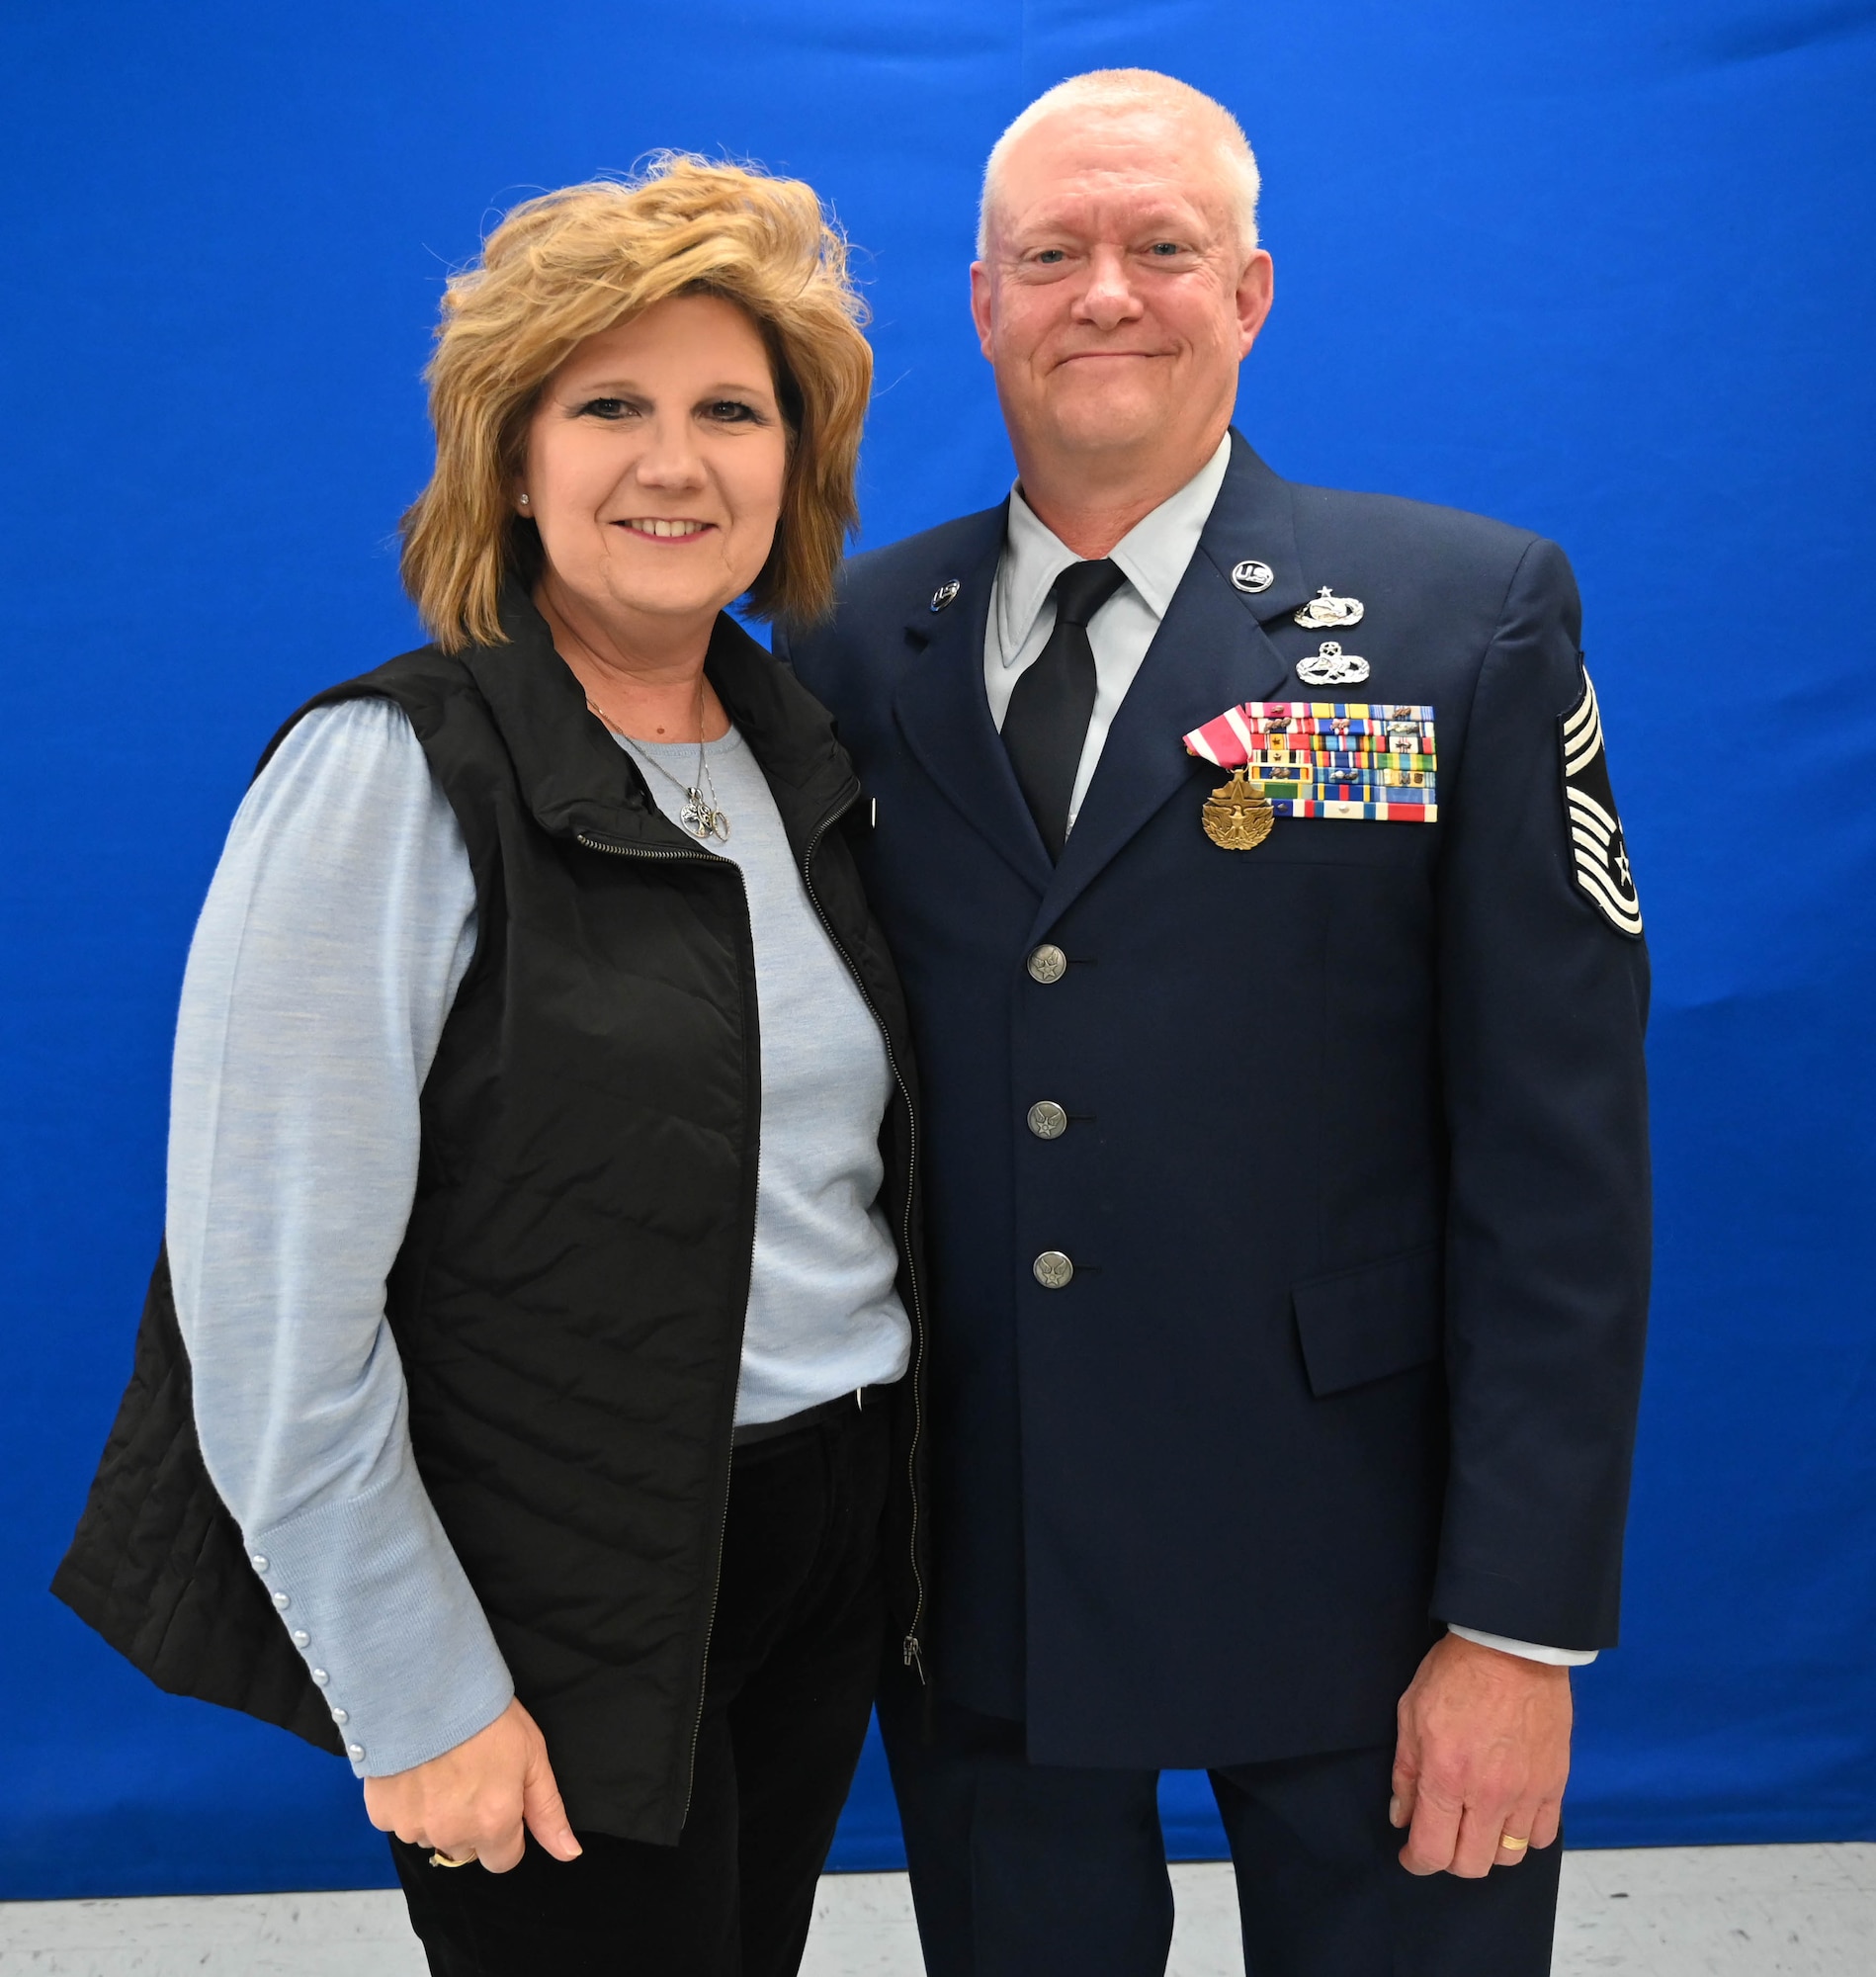 U.S. Air Force Chief Master Sgt. Douglas R. Lensing, Intelligence, Surveillance and Reconnaissance Group superintendent, retires in a ceremony attended by his wife, Michelle on Dec. 4, 2022 at Ebbing Air National Guard Base, Fort Smith, Ark.